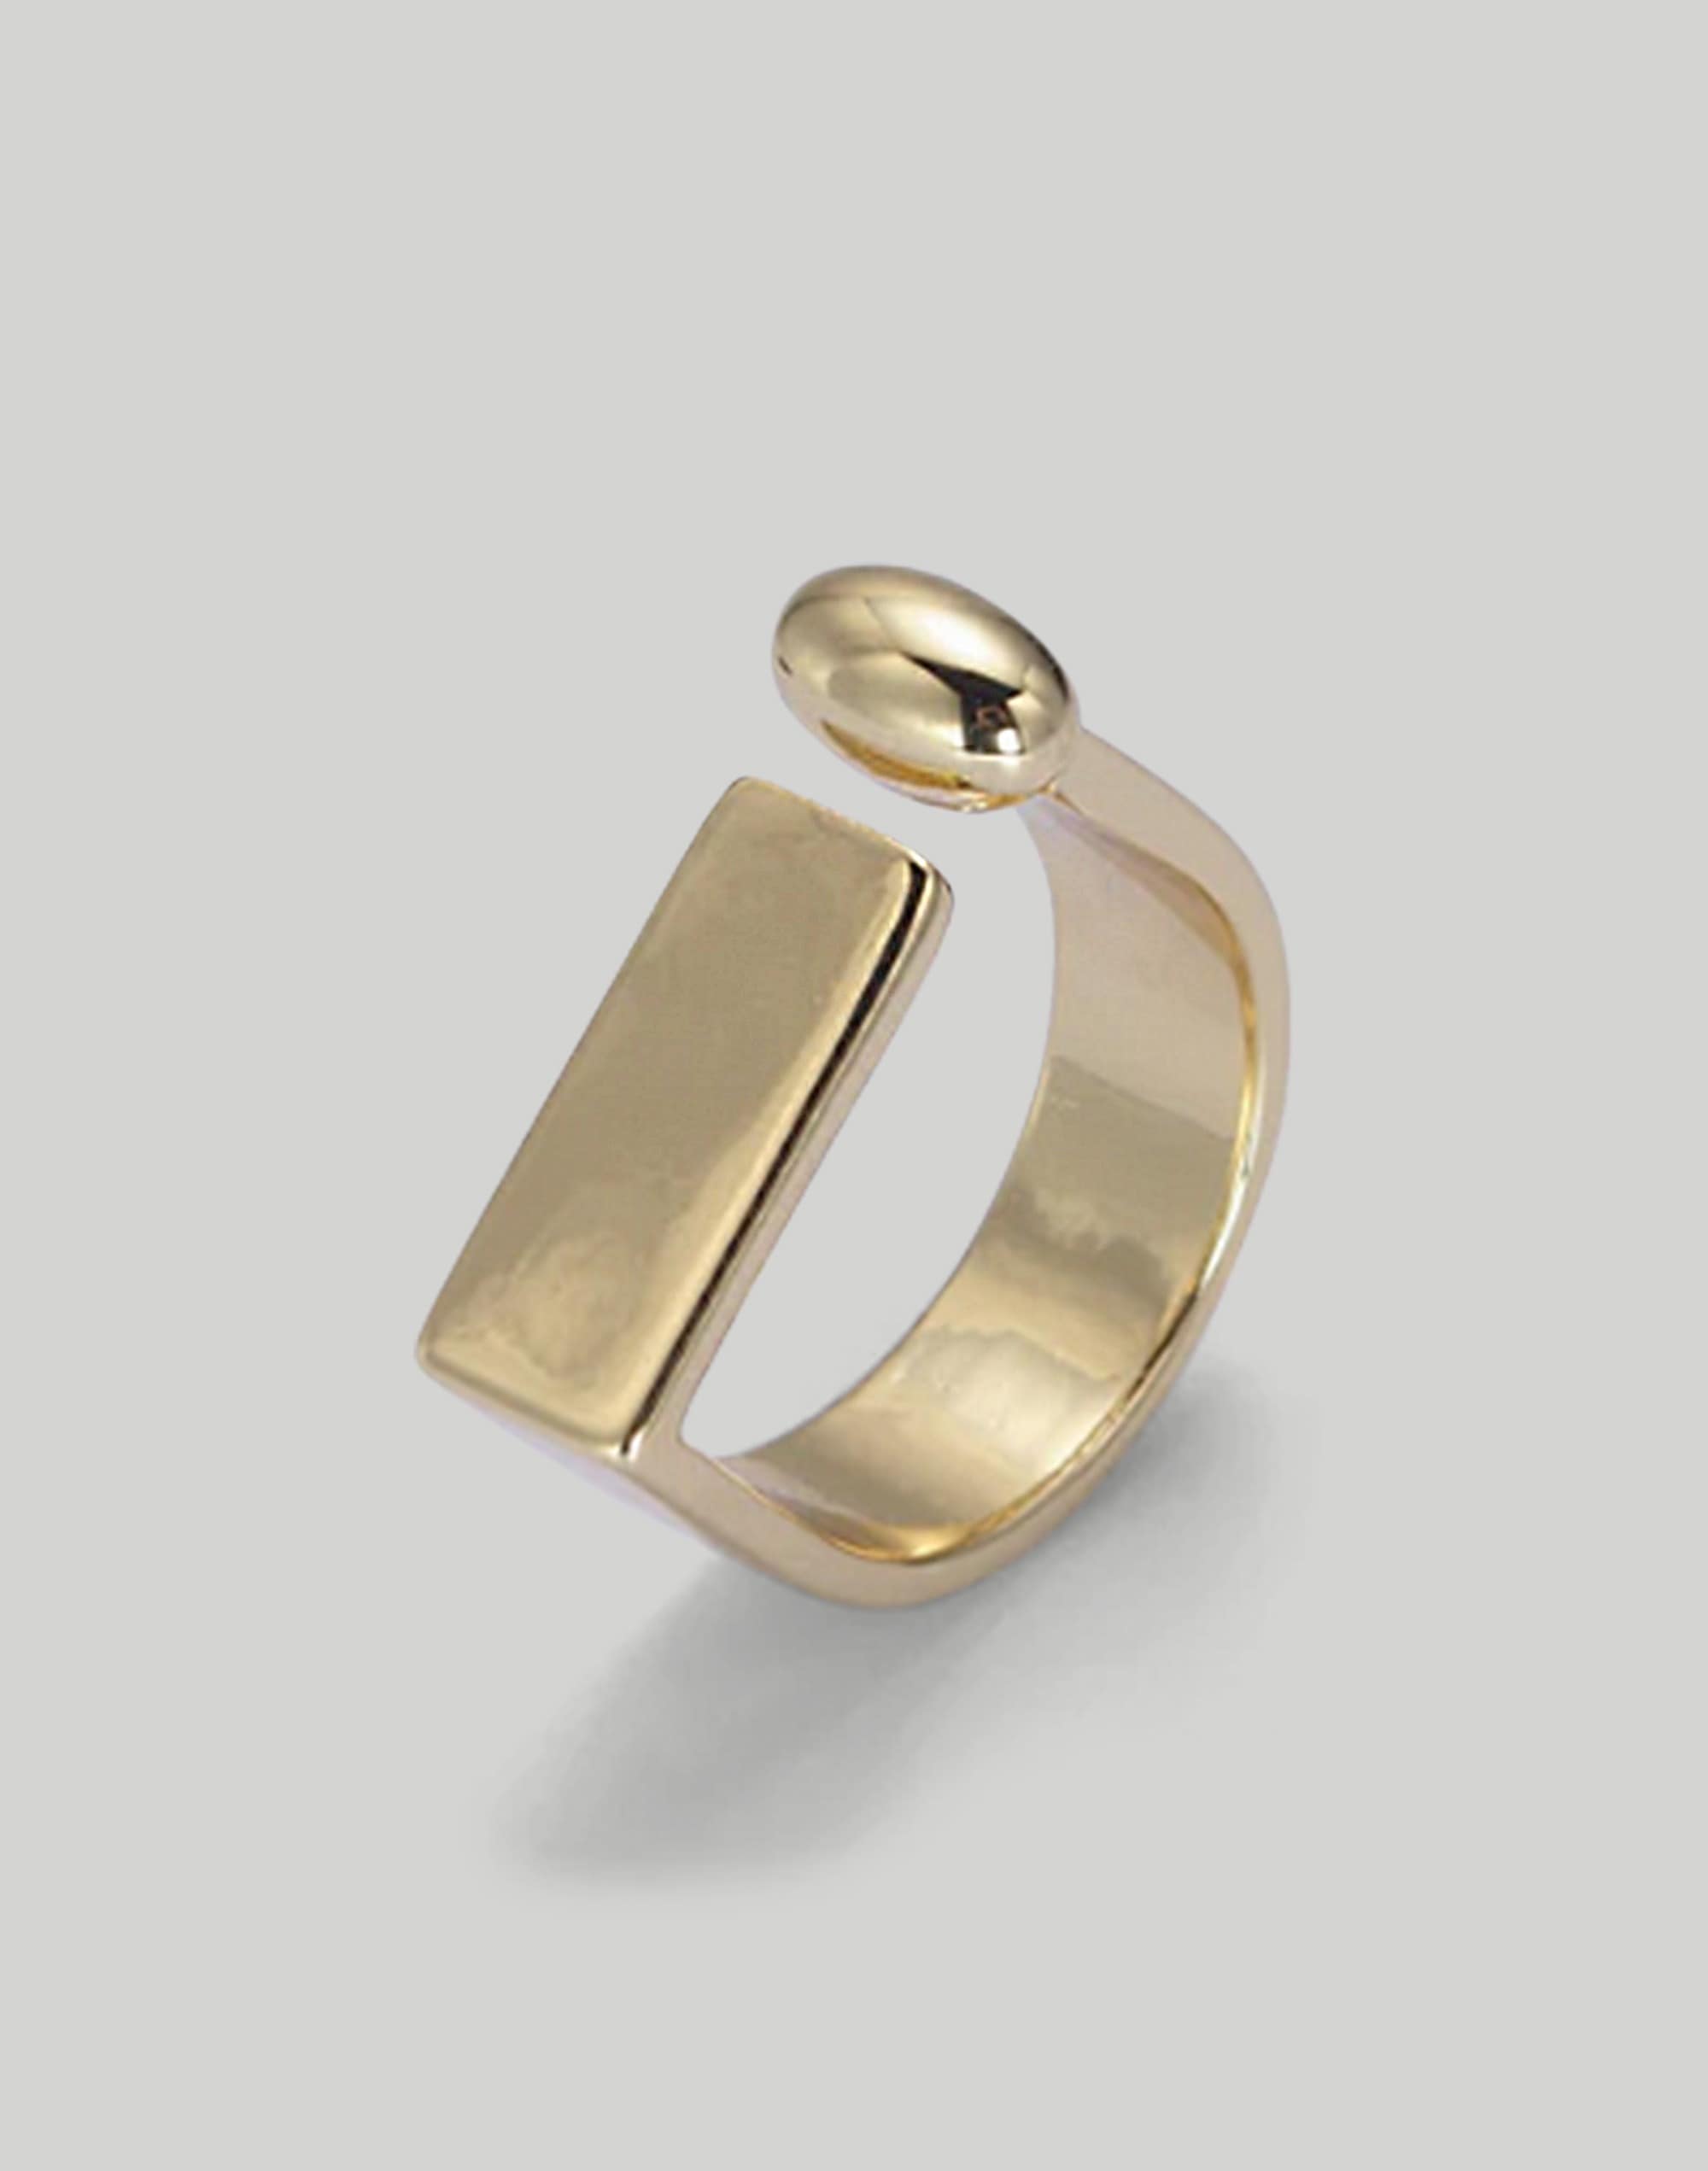 Abcrete & Co. The Rectangle Signet Ring